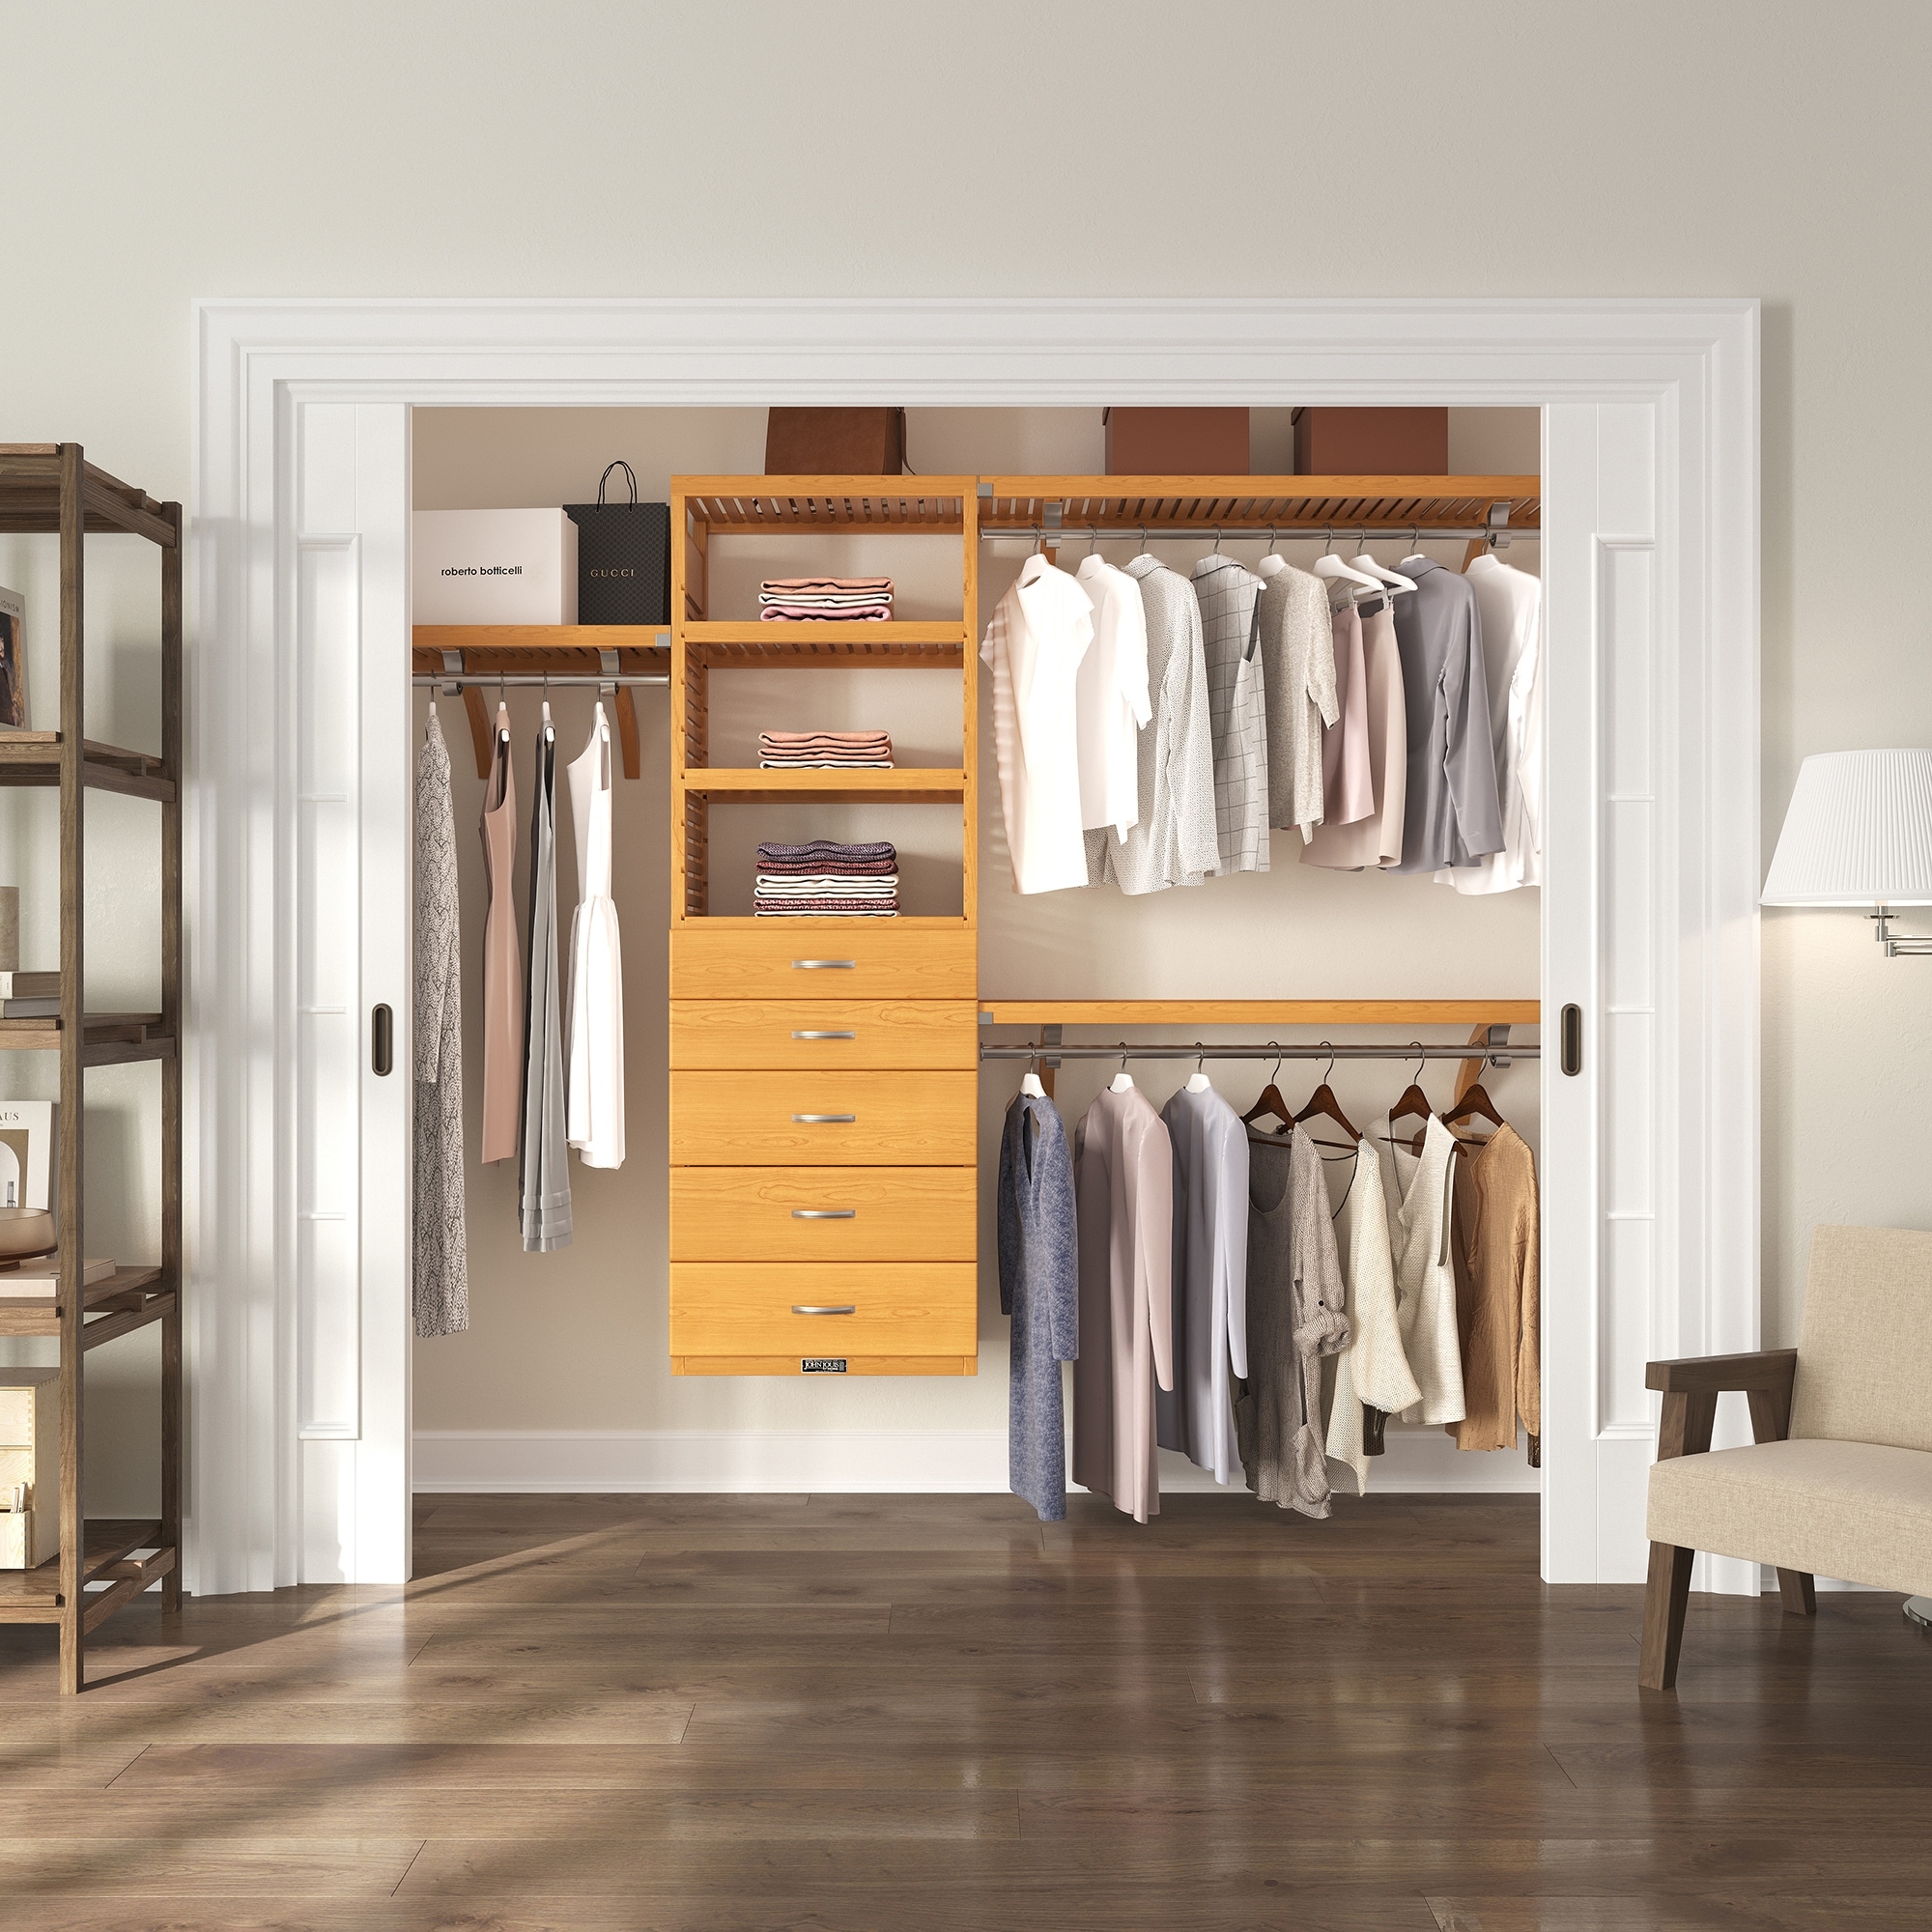 John Louis Home 16 in. Deep Deluxe Closet System in Honey Maple